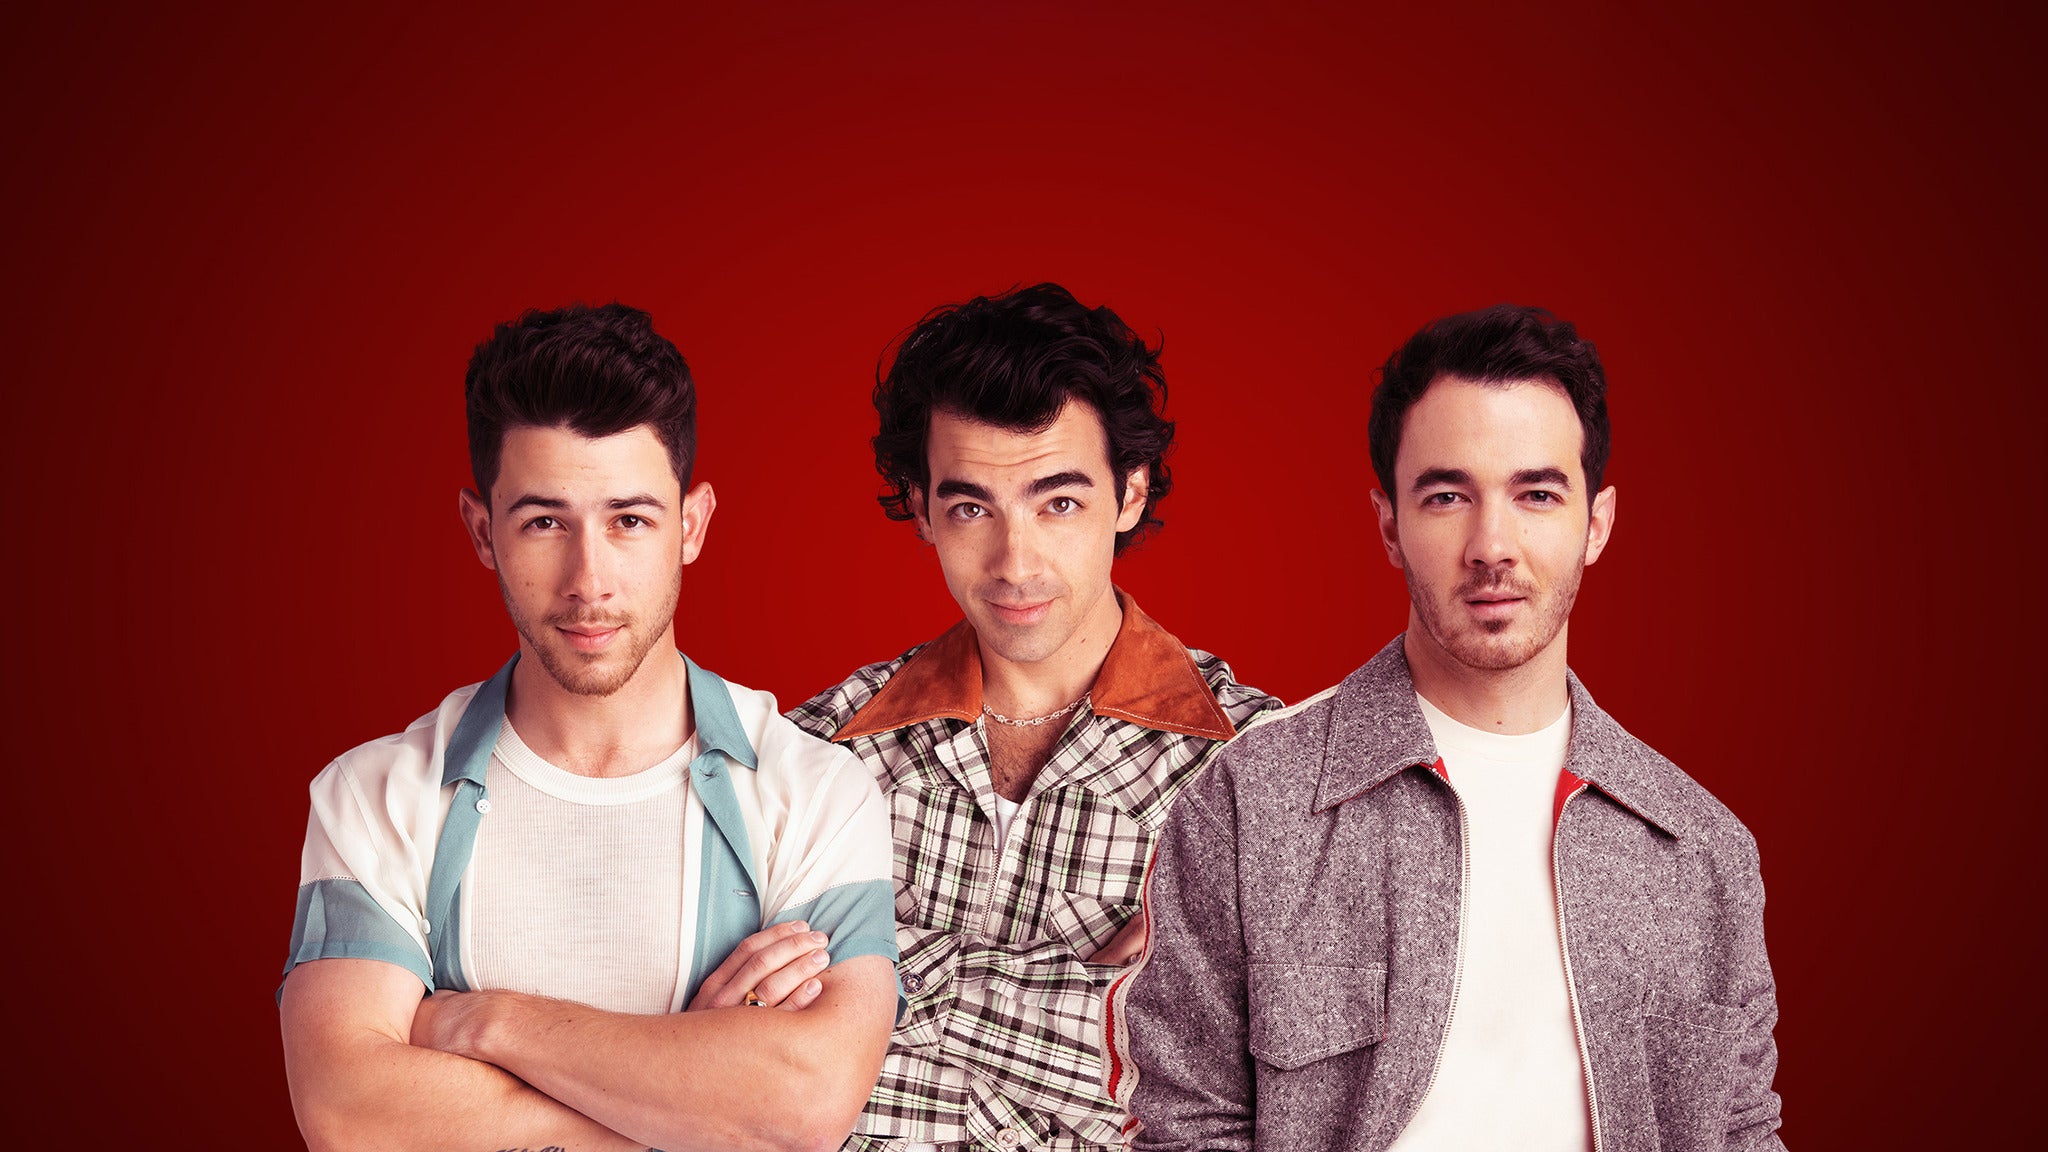 Jonas Brothers - Live in Vegas in Las Vegas promo photo for Ticketmaster presale offer code